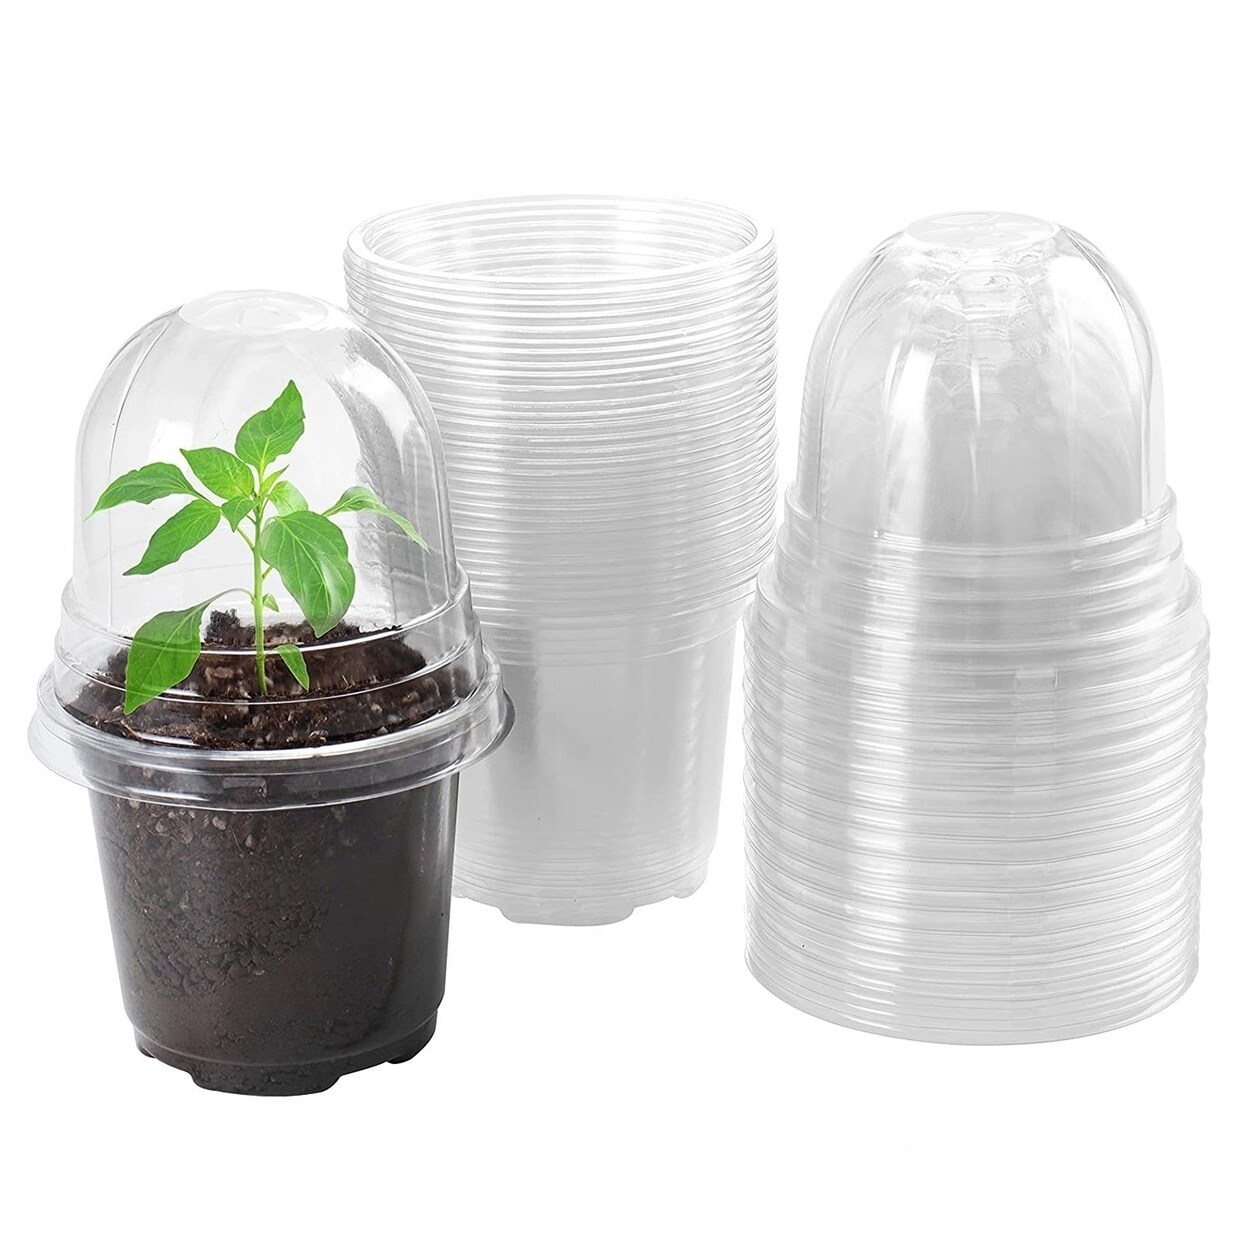 SKUSHOPS 30Pcs Plant Nursery Pots PET Flower Seed Starting Pots Container with Dome with Drainage Holes